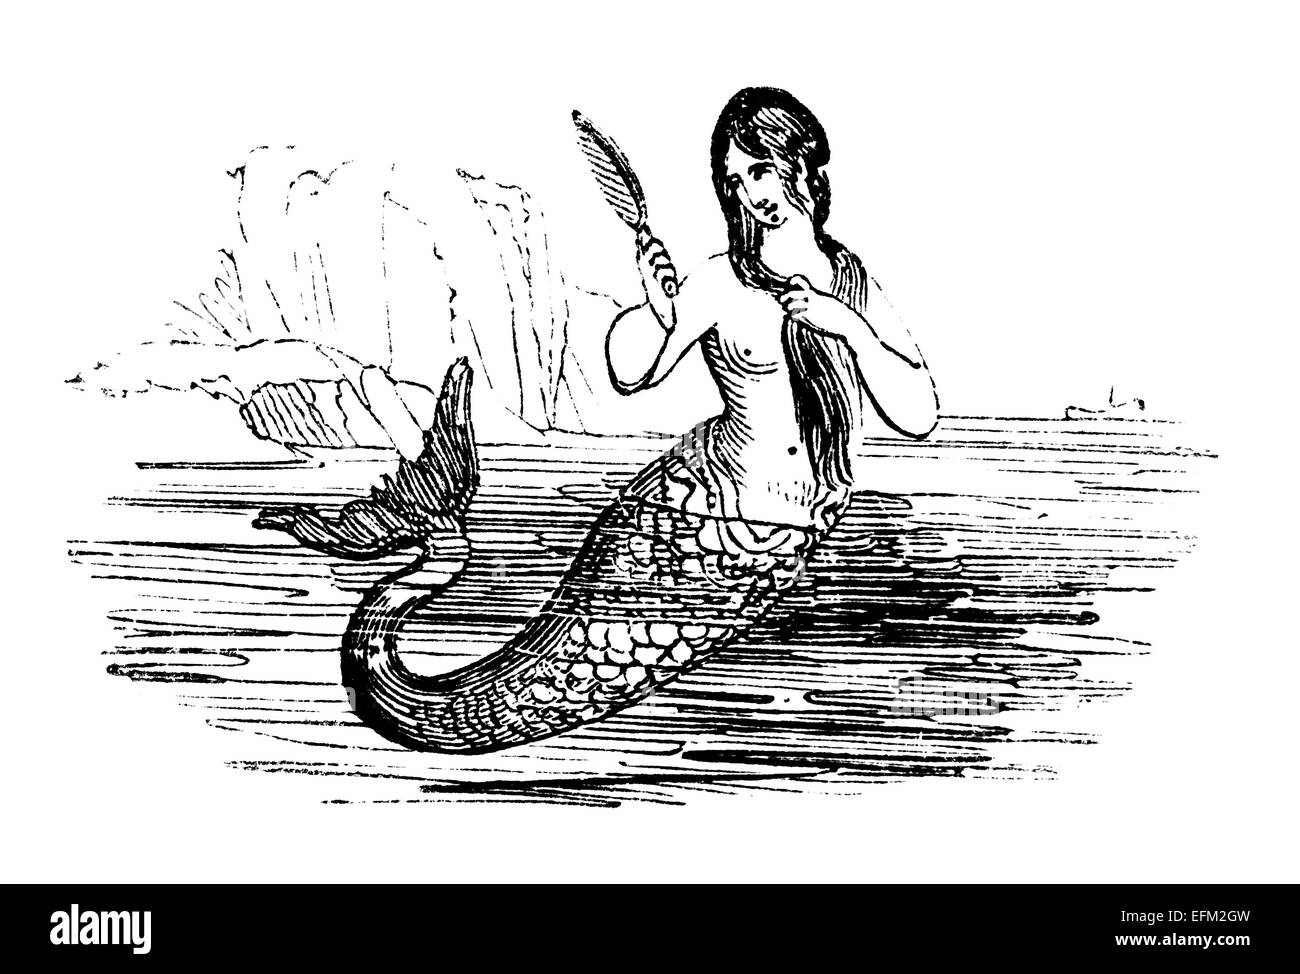 19th century engraving of a mermaid in the sea Stock Photo